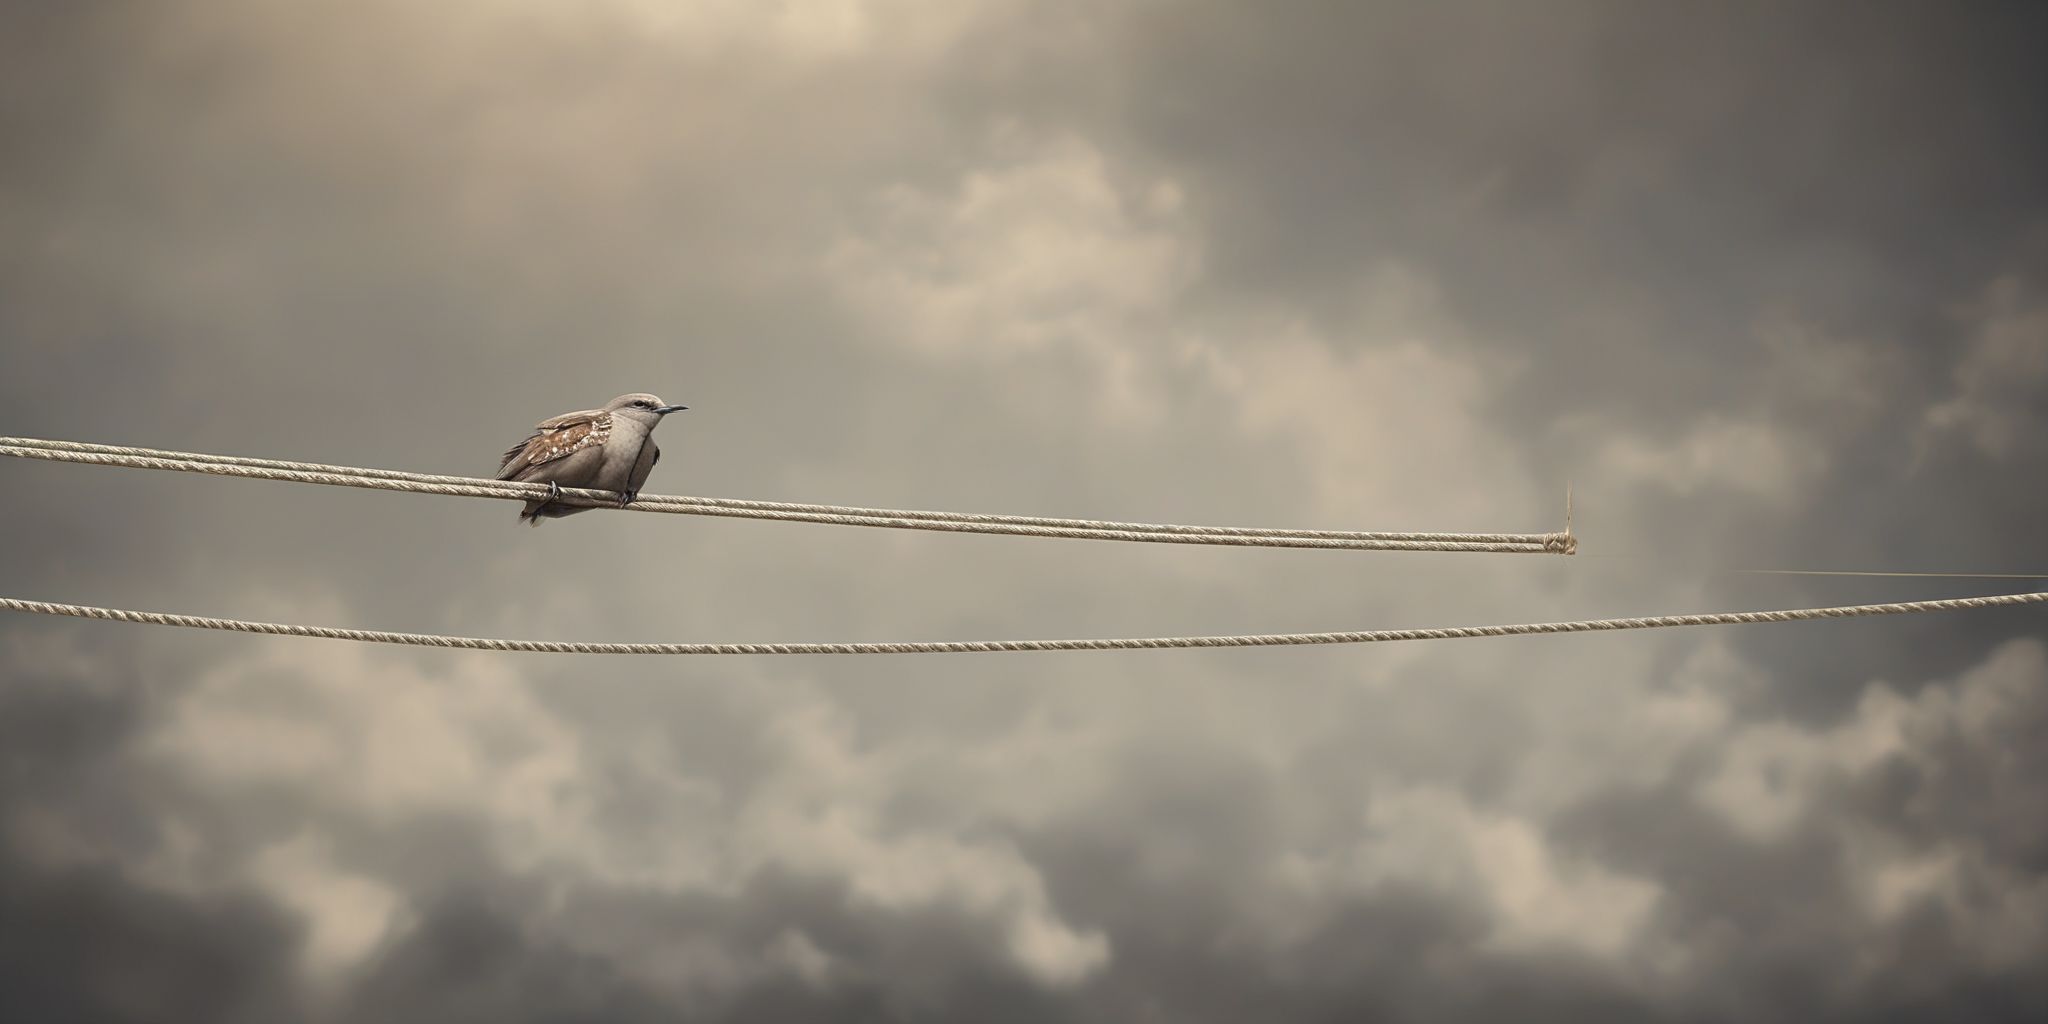 Tightrope  in realistic, photographic style